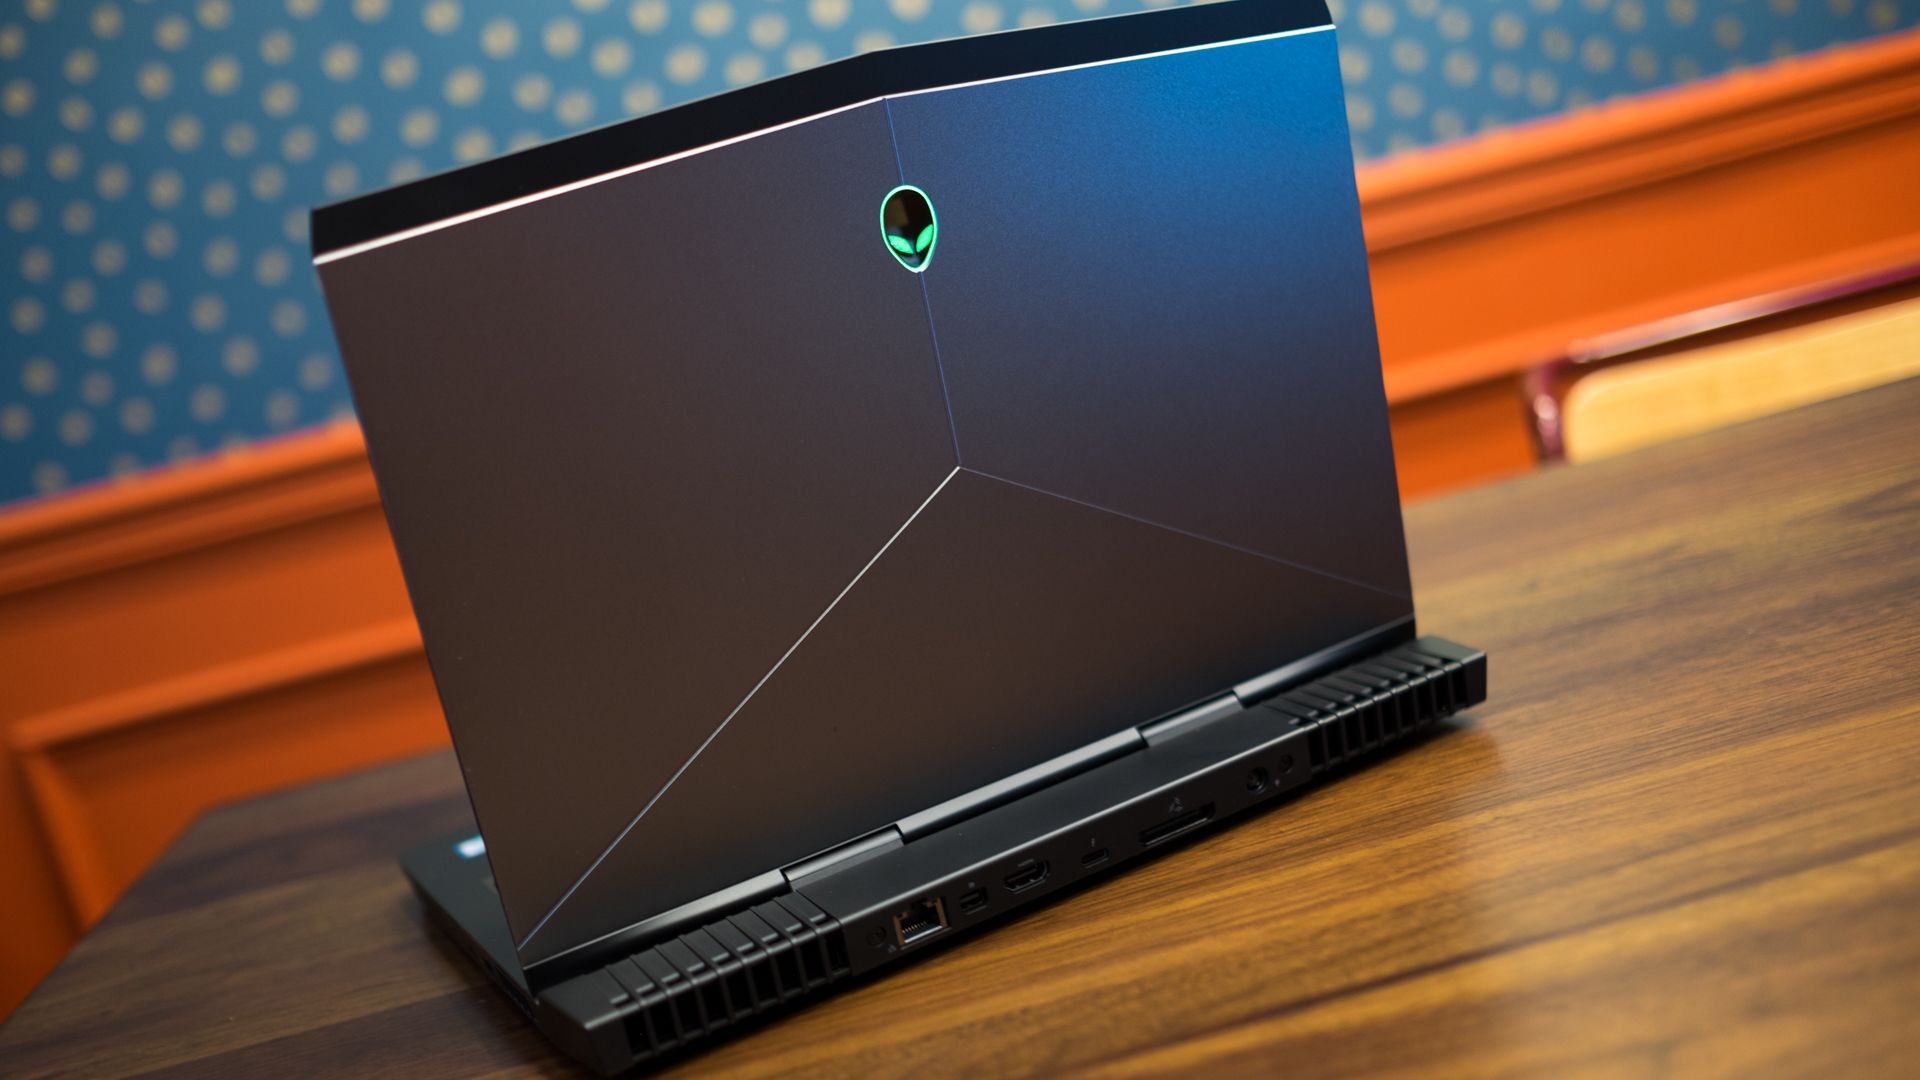 Dell refreshes Alienware laptop lineup with new graphics and storage